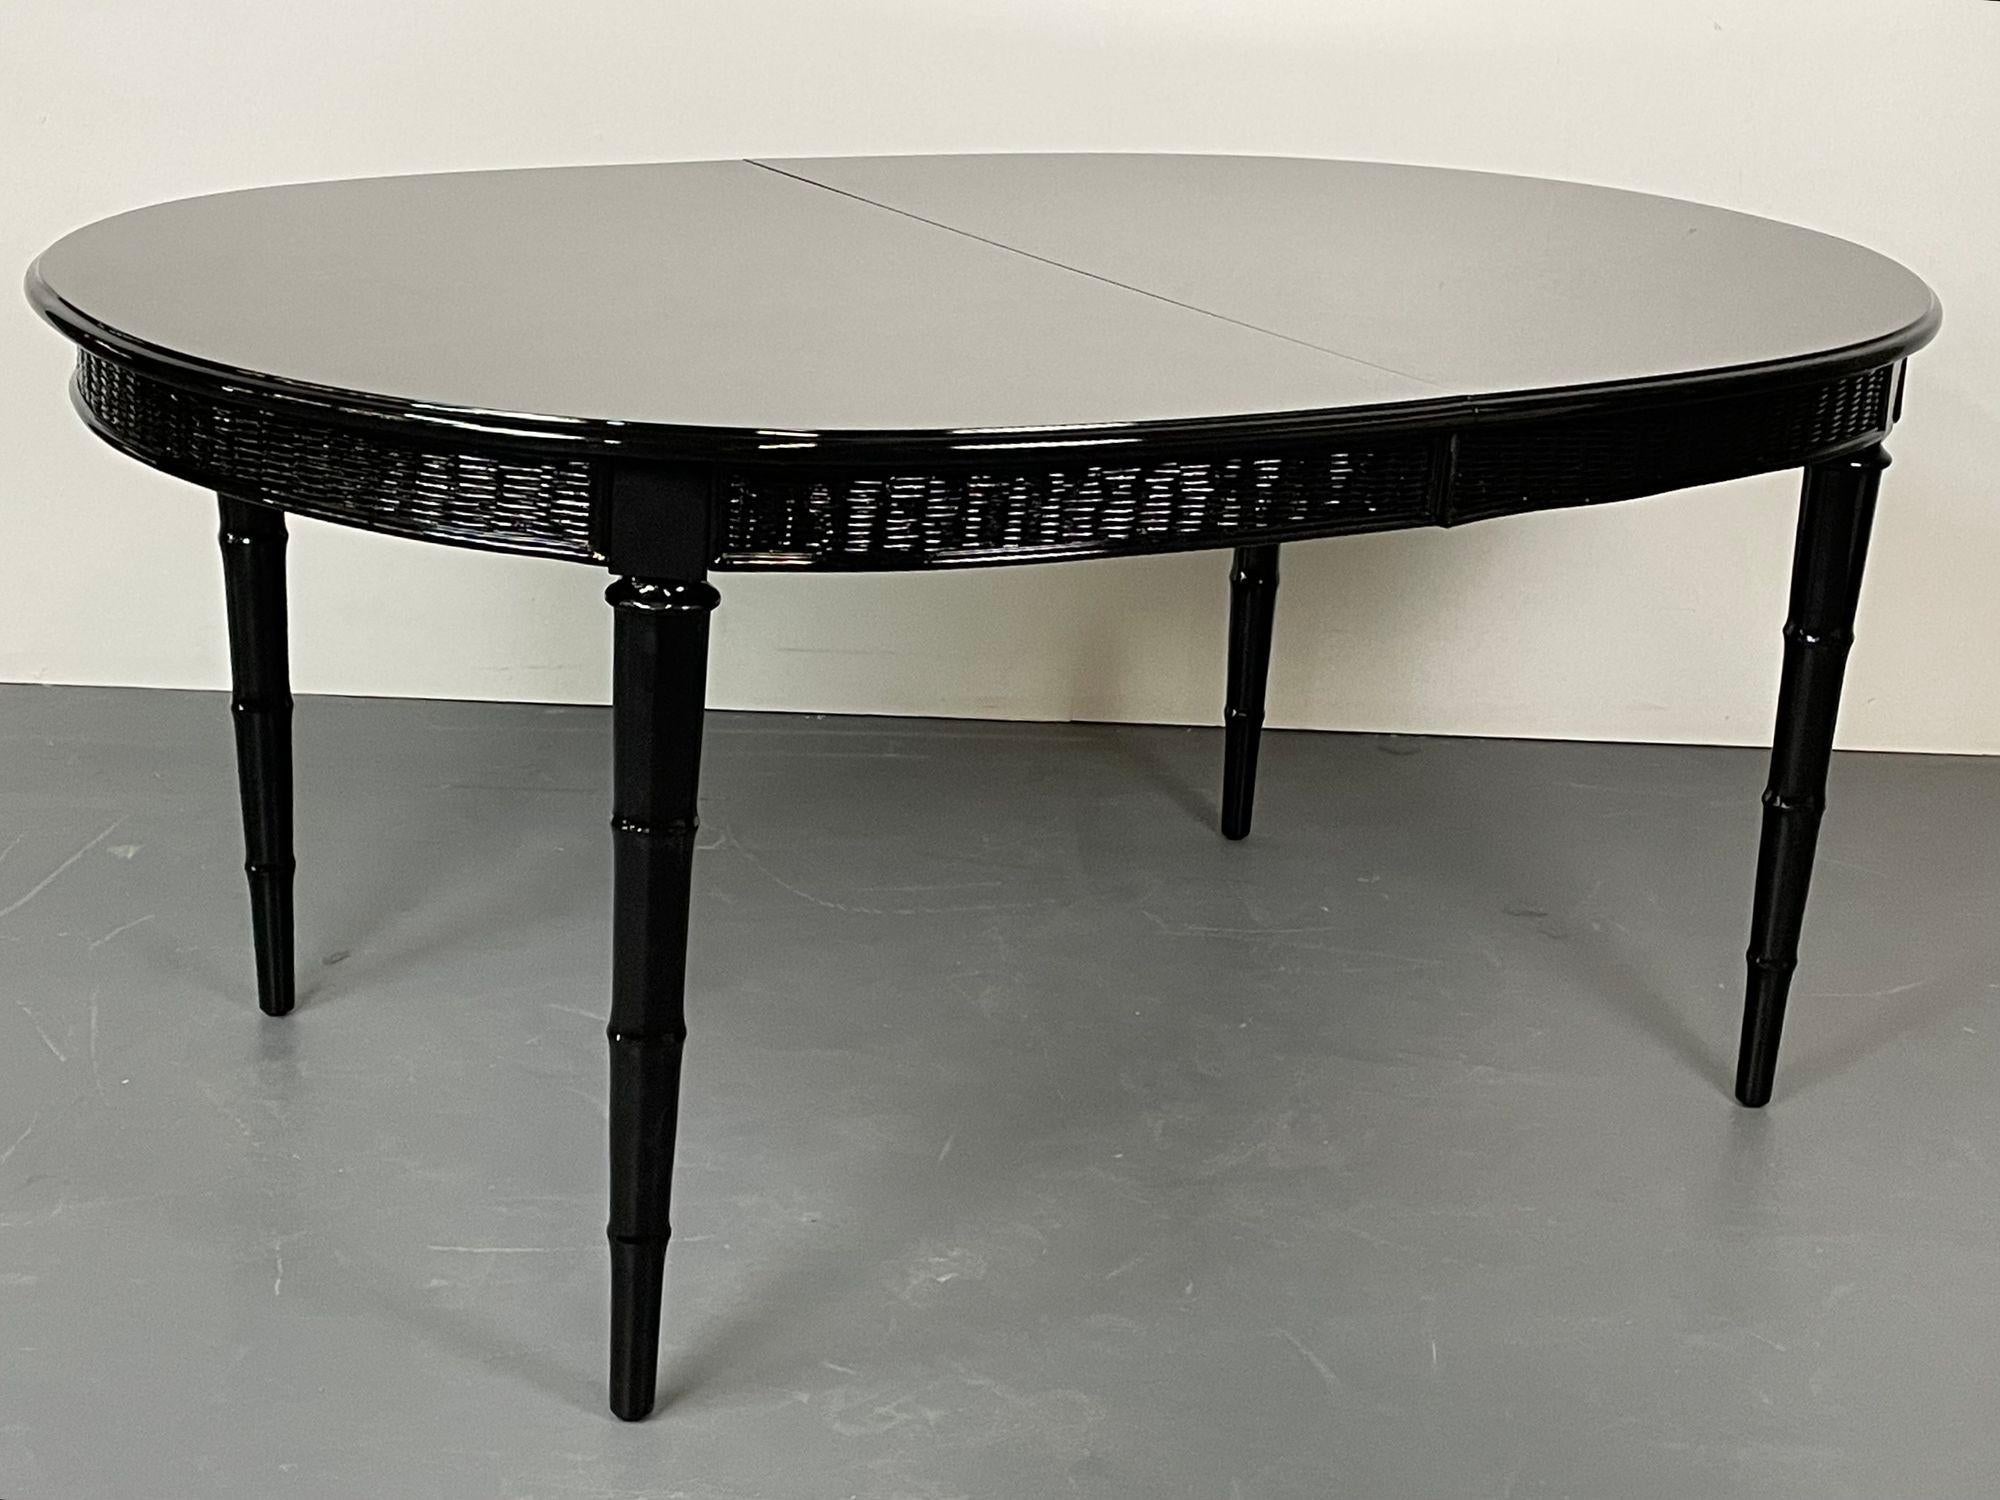 Faux Bamboo and wicker dining table having two leaves fully refinished in a black lacquer by American of Martinsville

A set of bamboo style table legs supporting a finely ebonized table top with a wicker apron. The whole expanding with two 16